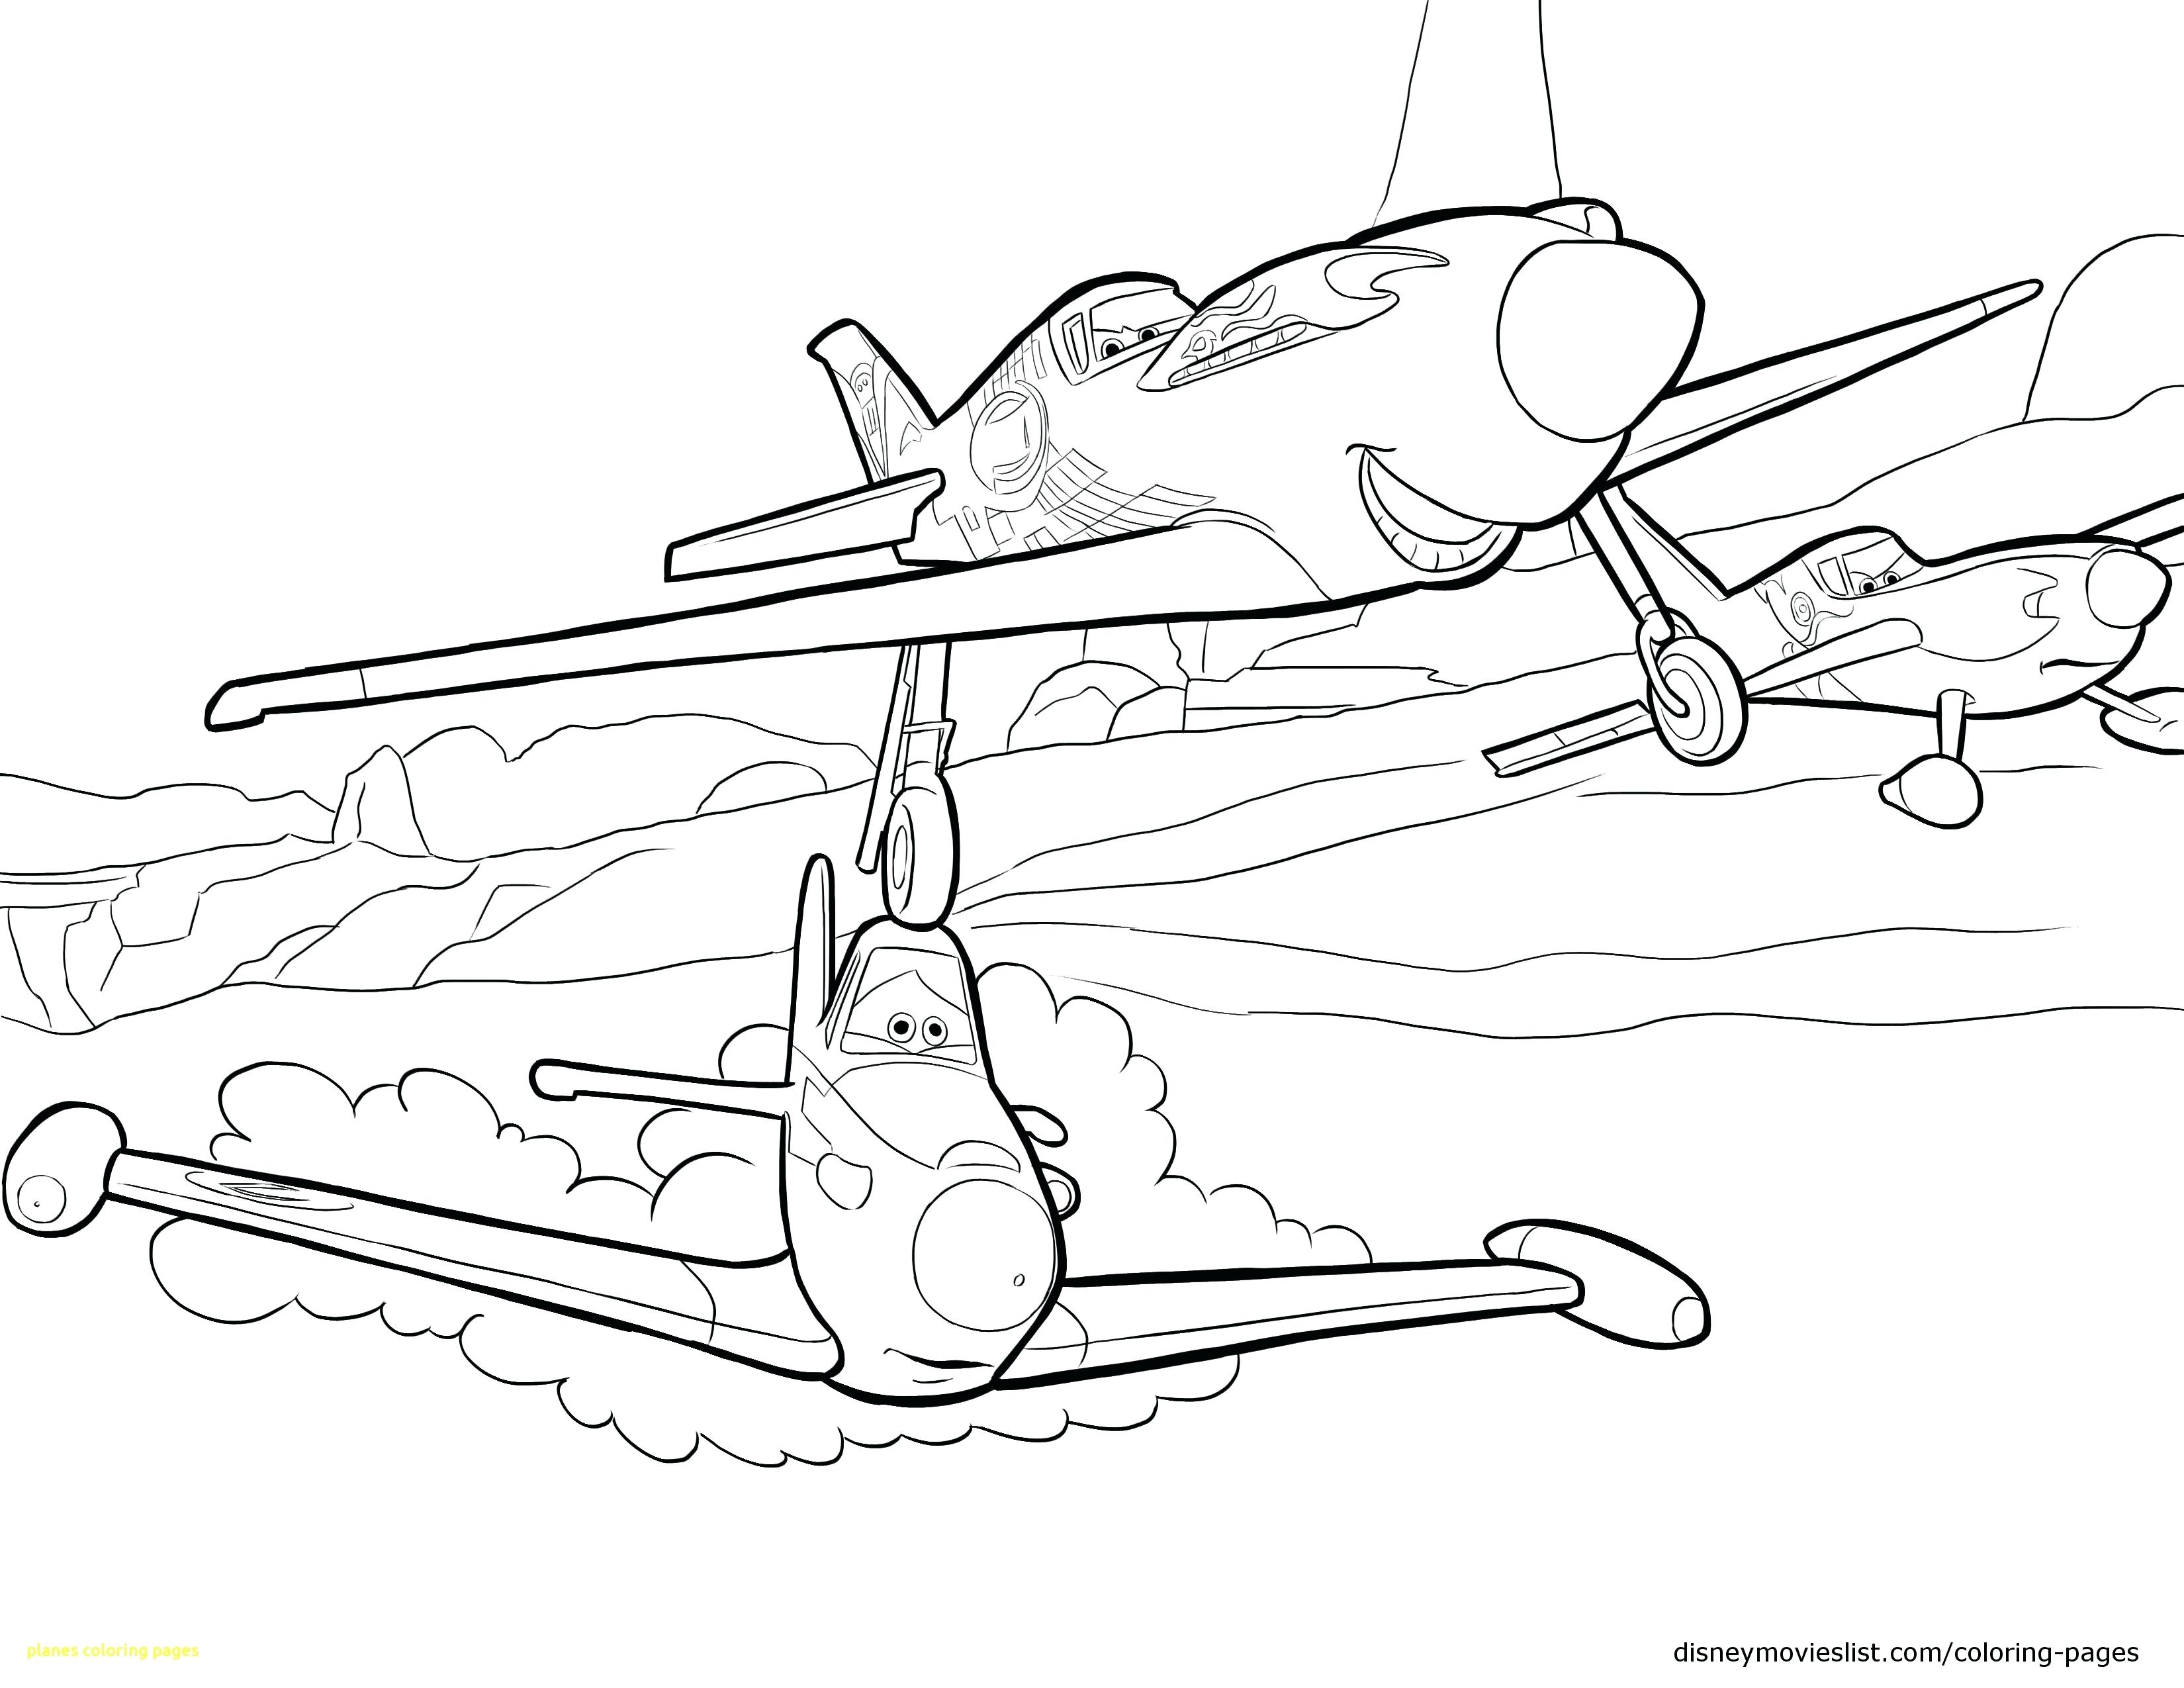 Download Simple Airplane Drawing at GetDrawings.com | Free for ...